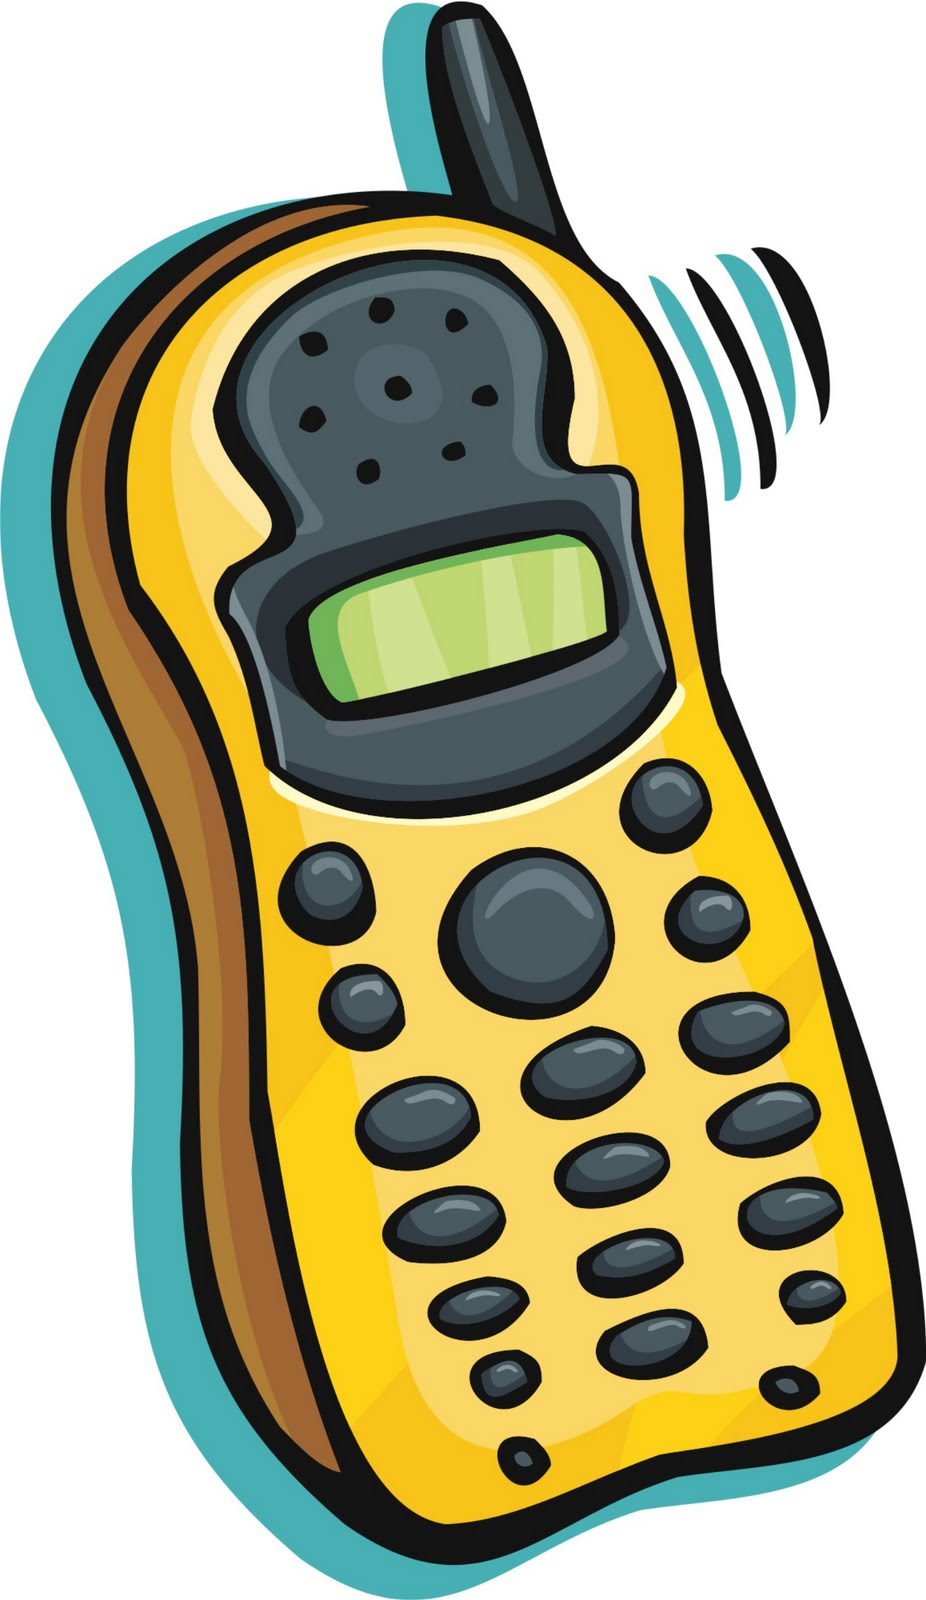 Picture Of A Phone - ClipArt Best